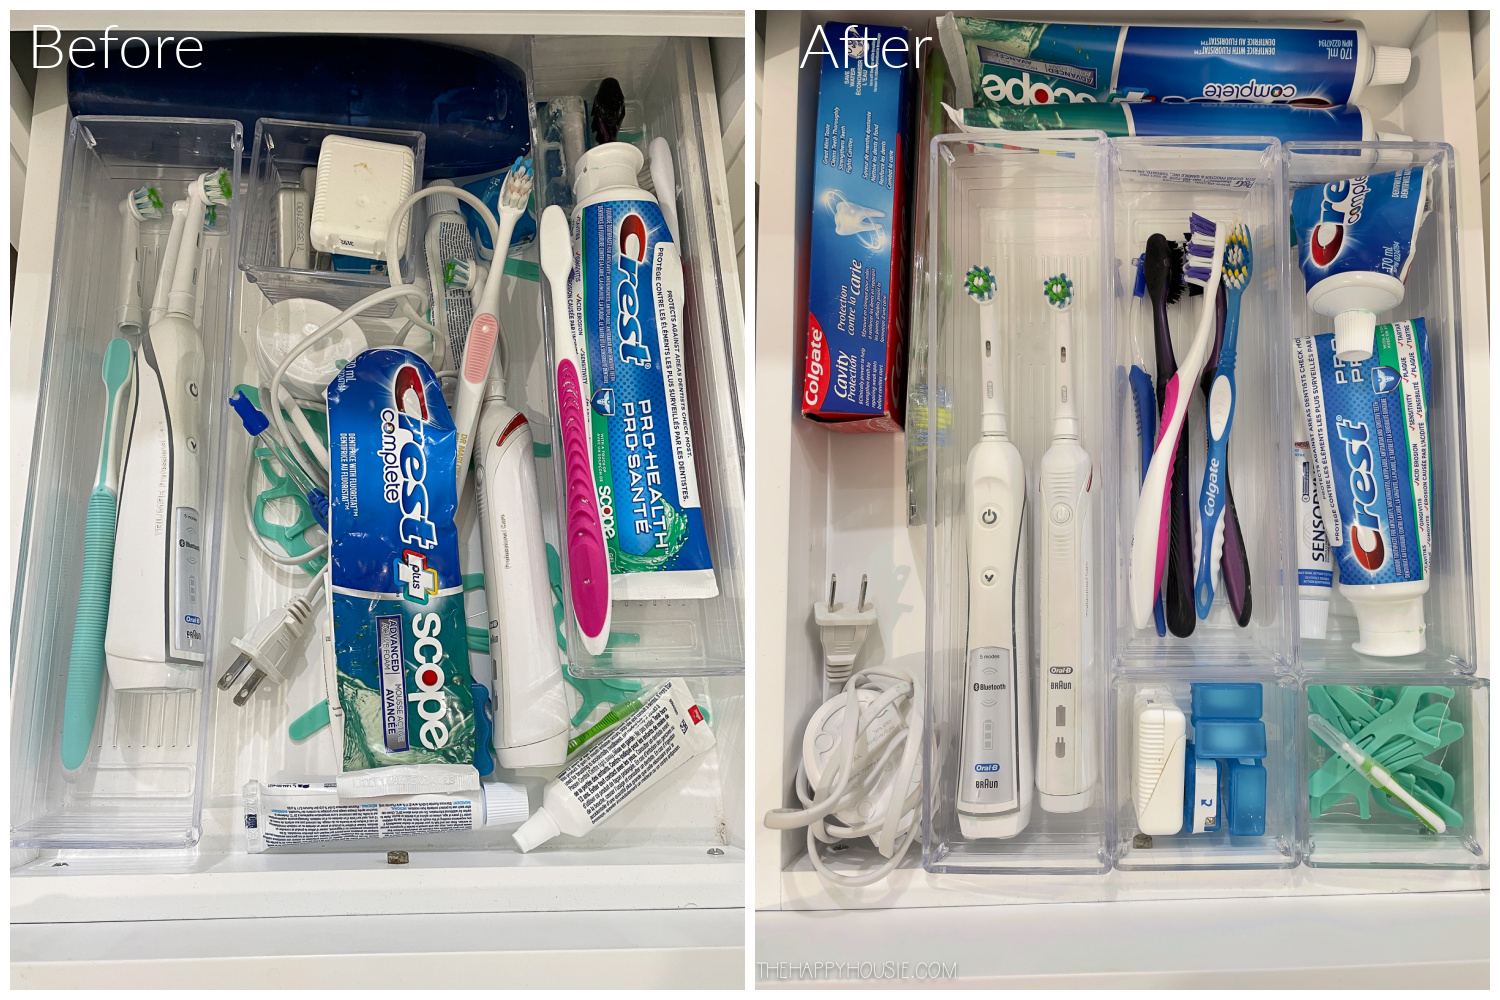 The toothbrushes before and after being organized.